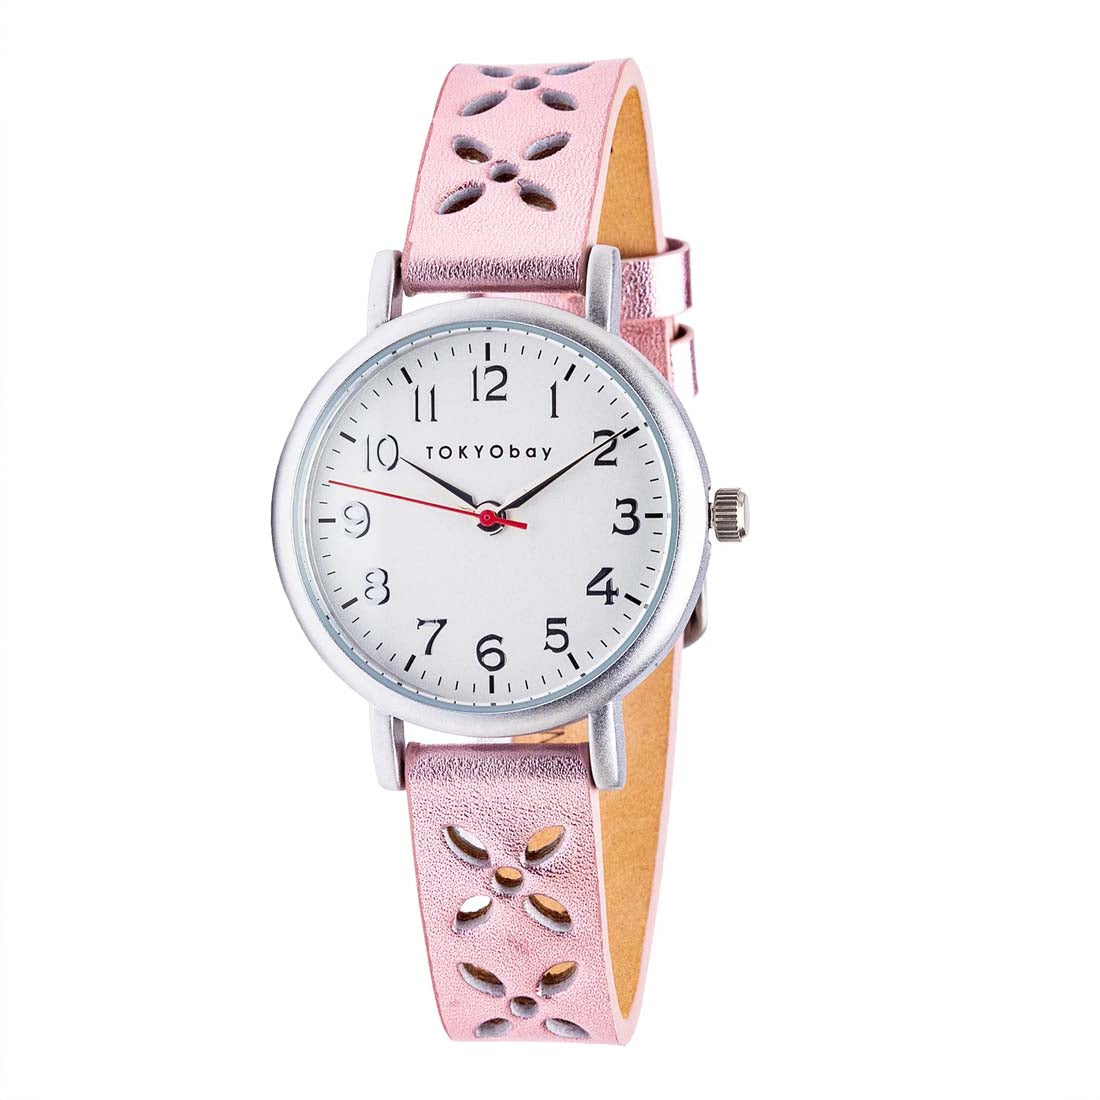 Metallic Pink Clover Leather Watch